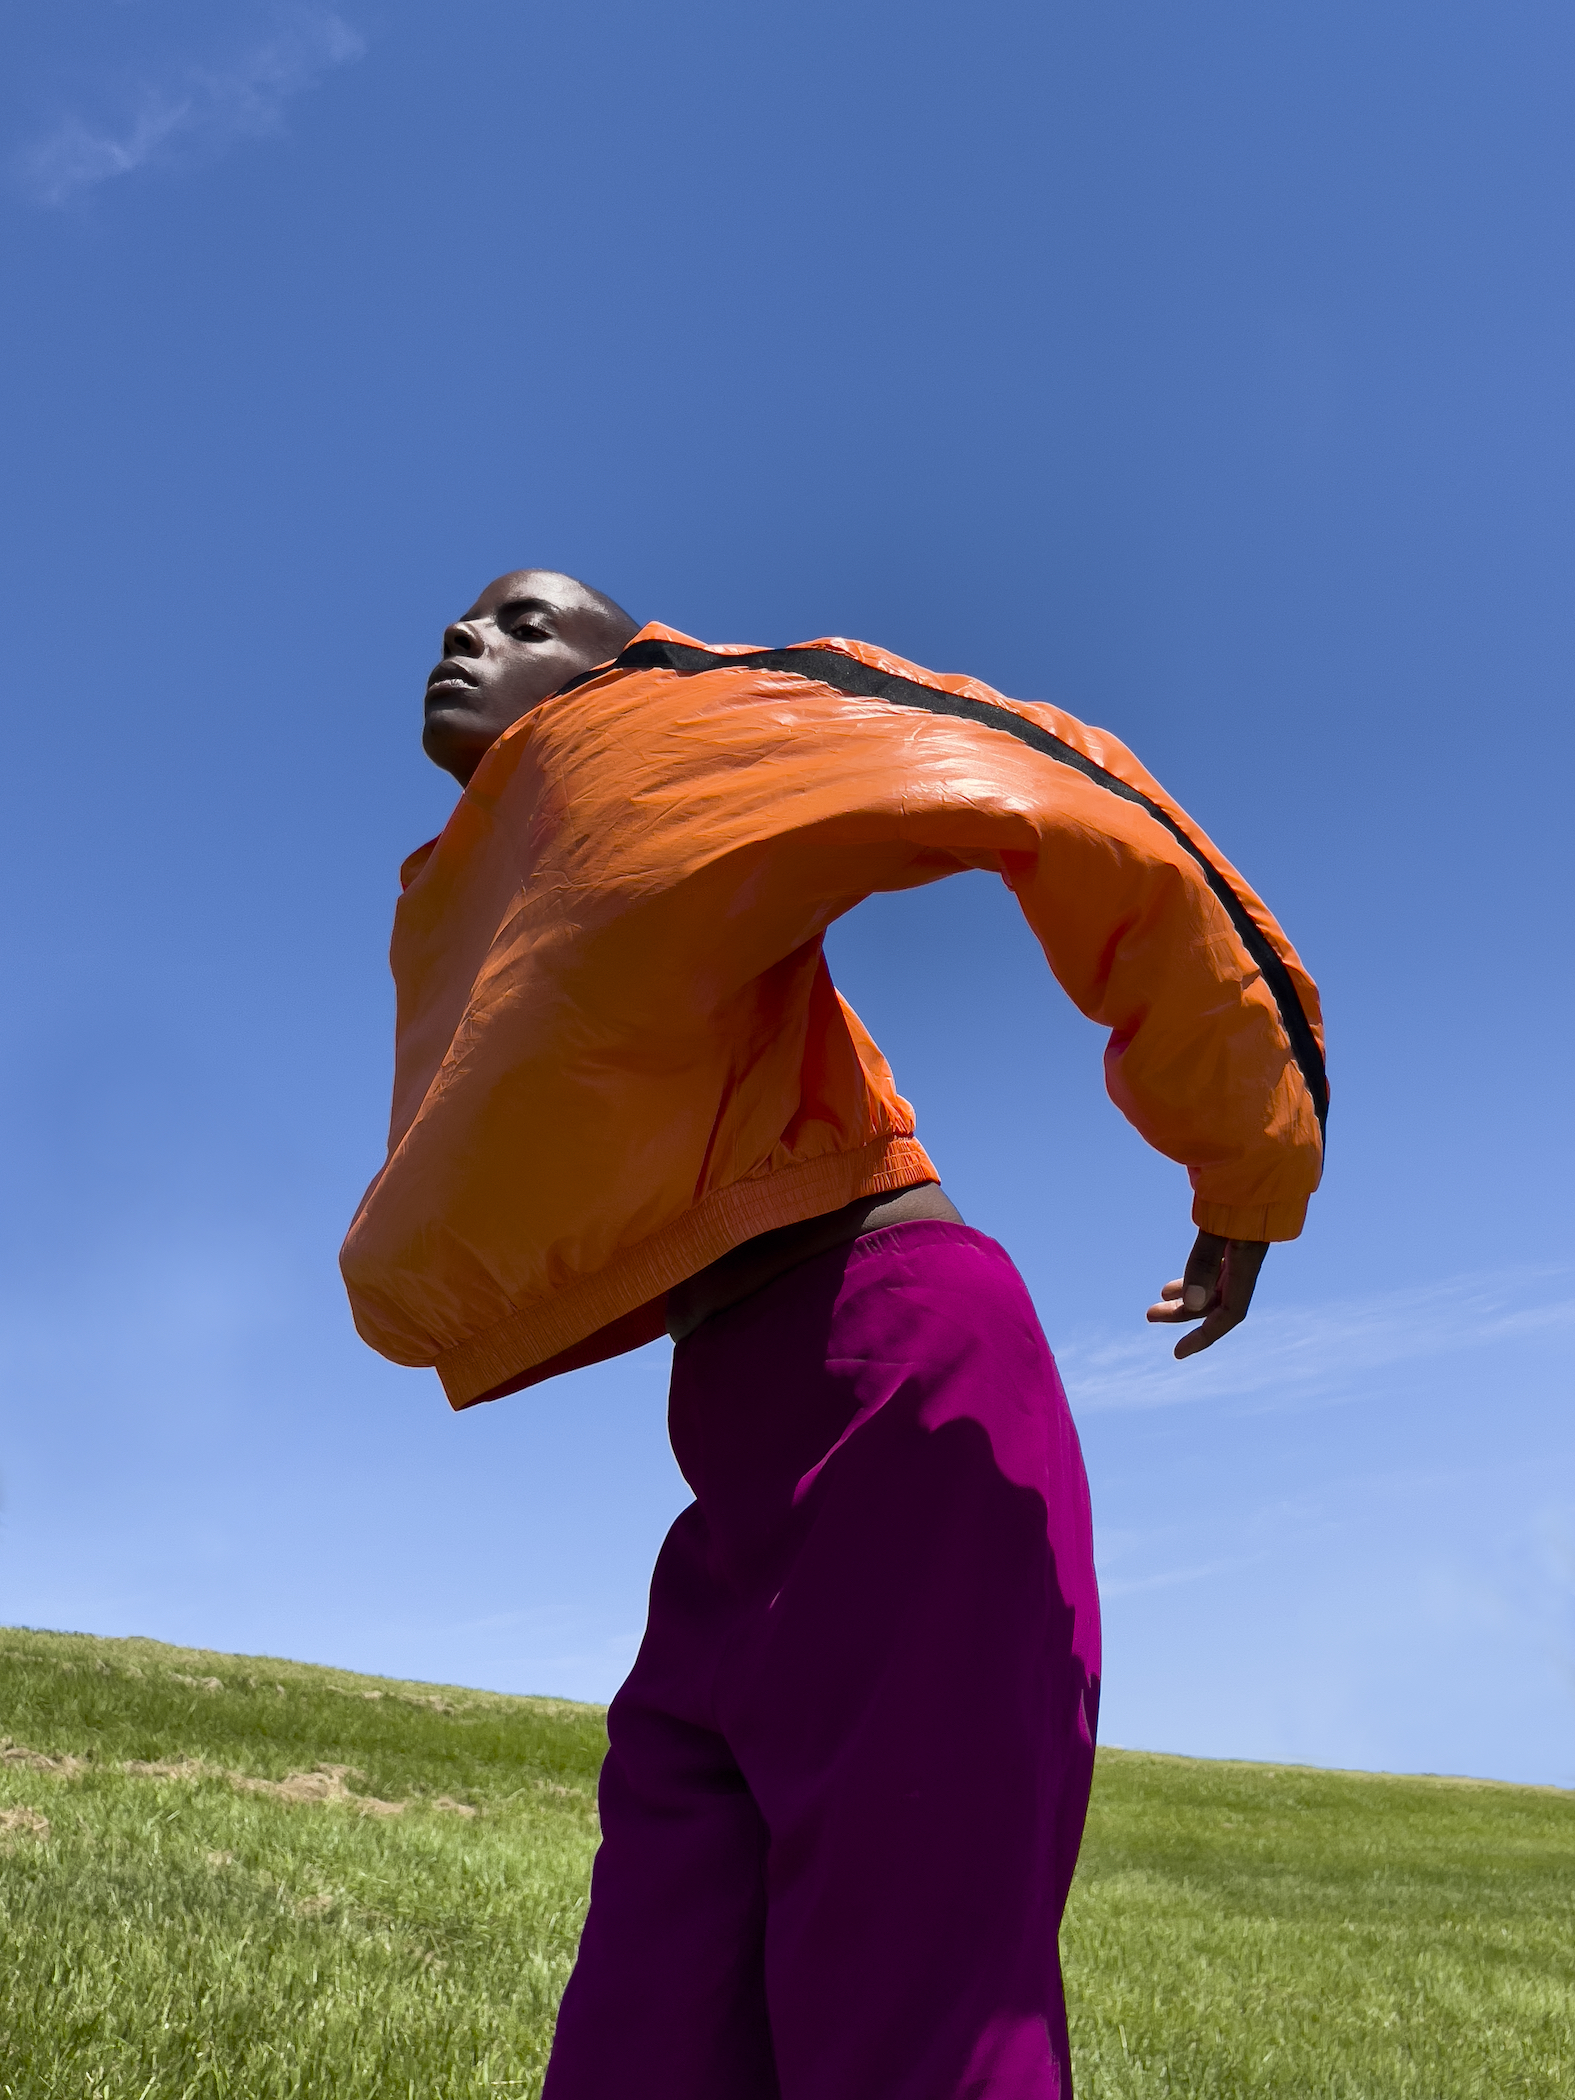 a portrait of a woman in a grassy field wearing bright colors by arielle bobb-willis